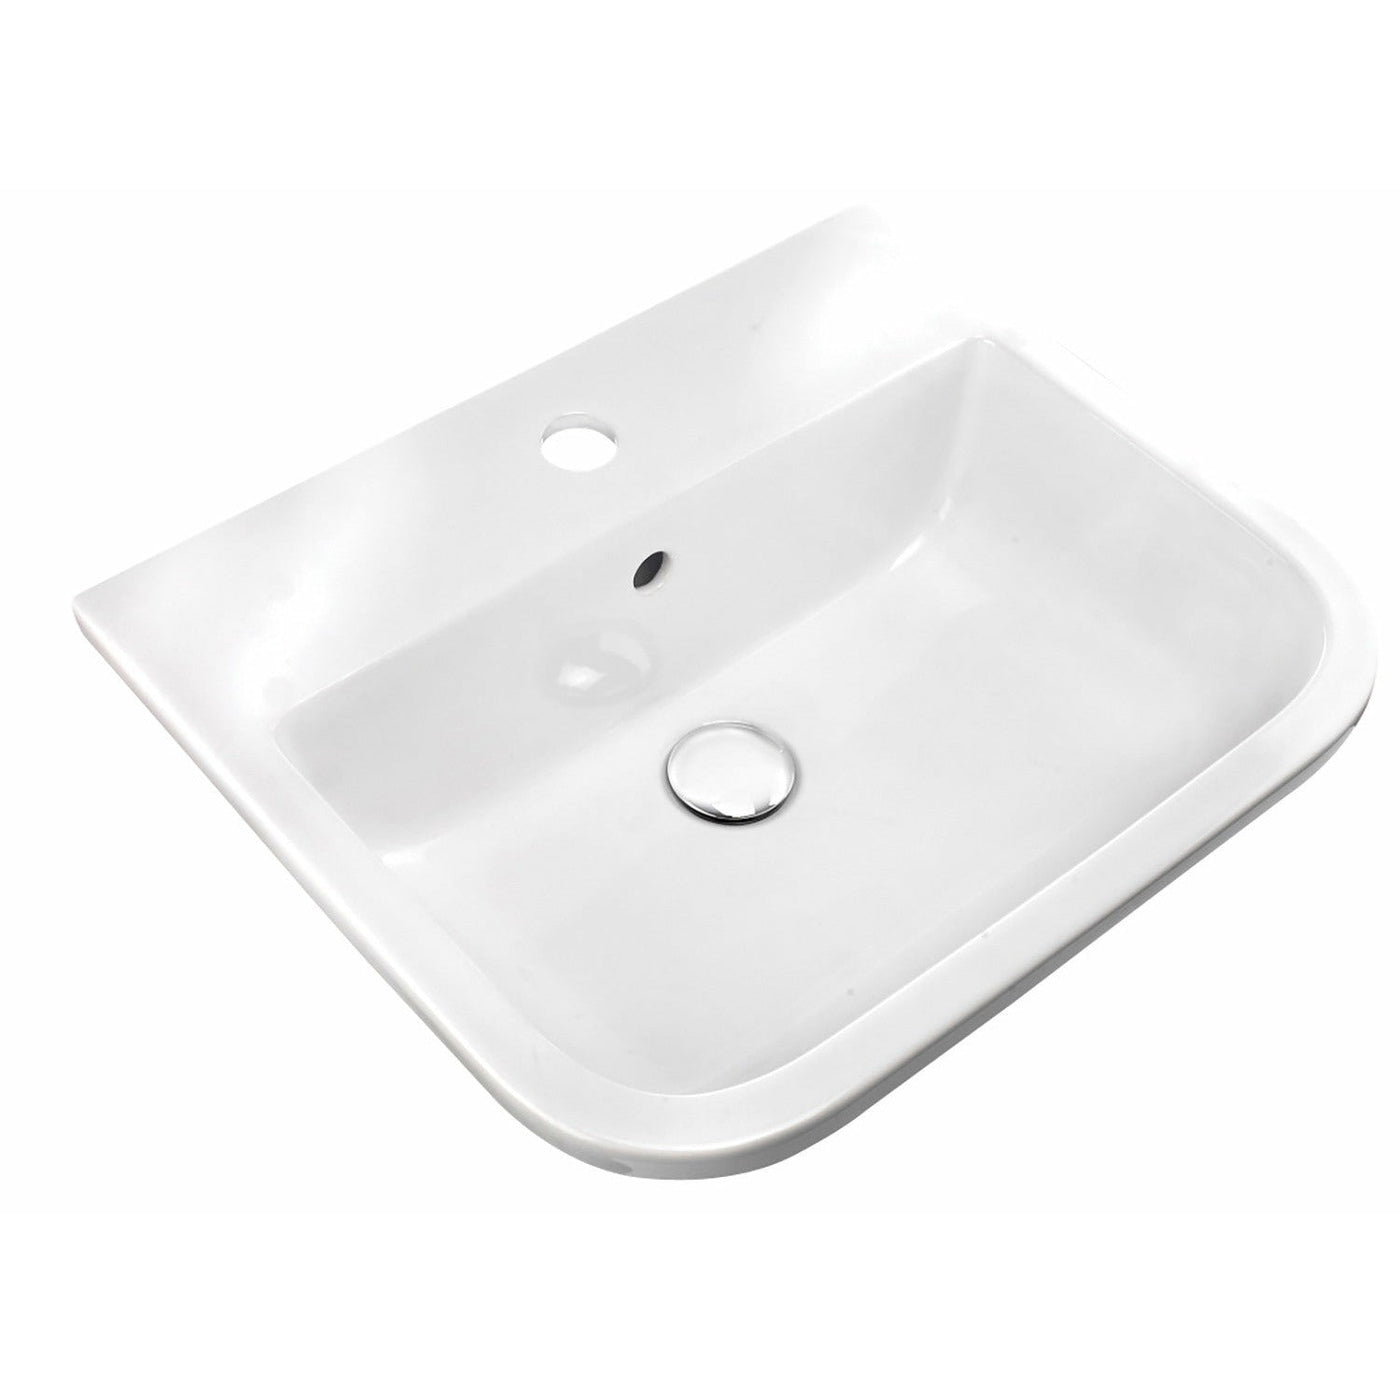 Frontline White Series 600 500mm Inset Counter Basin - 1 Tap Hole - Letta London - 